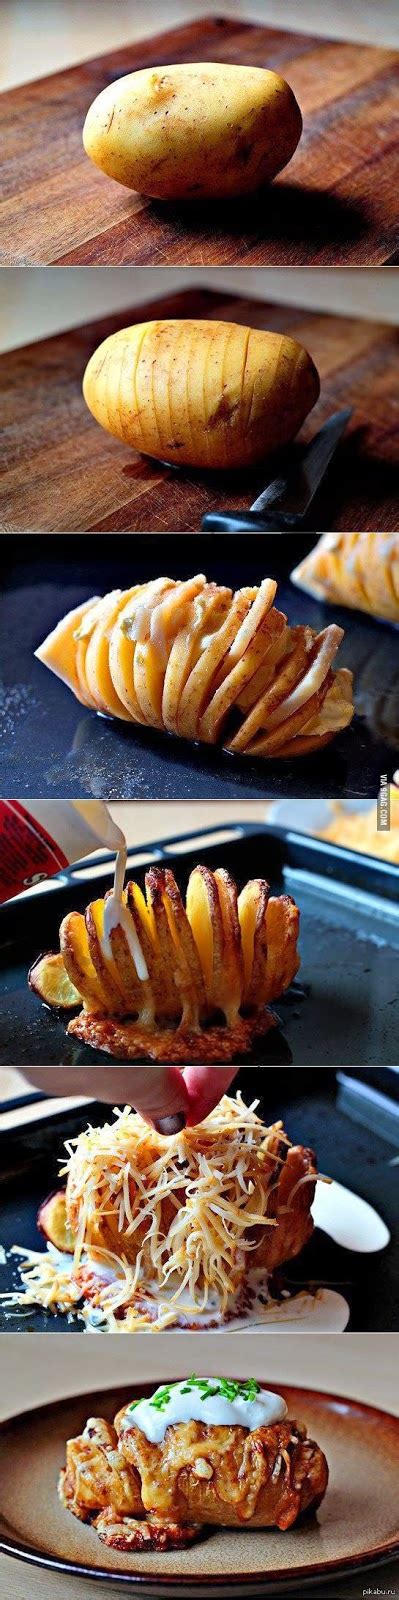 how to the perfect baked potato